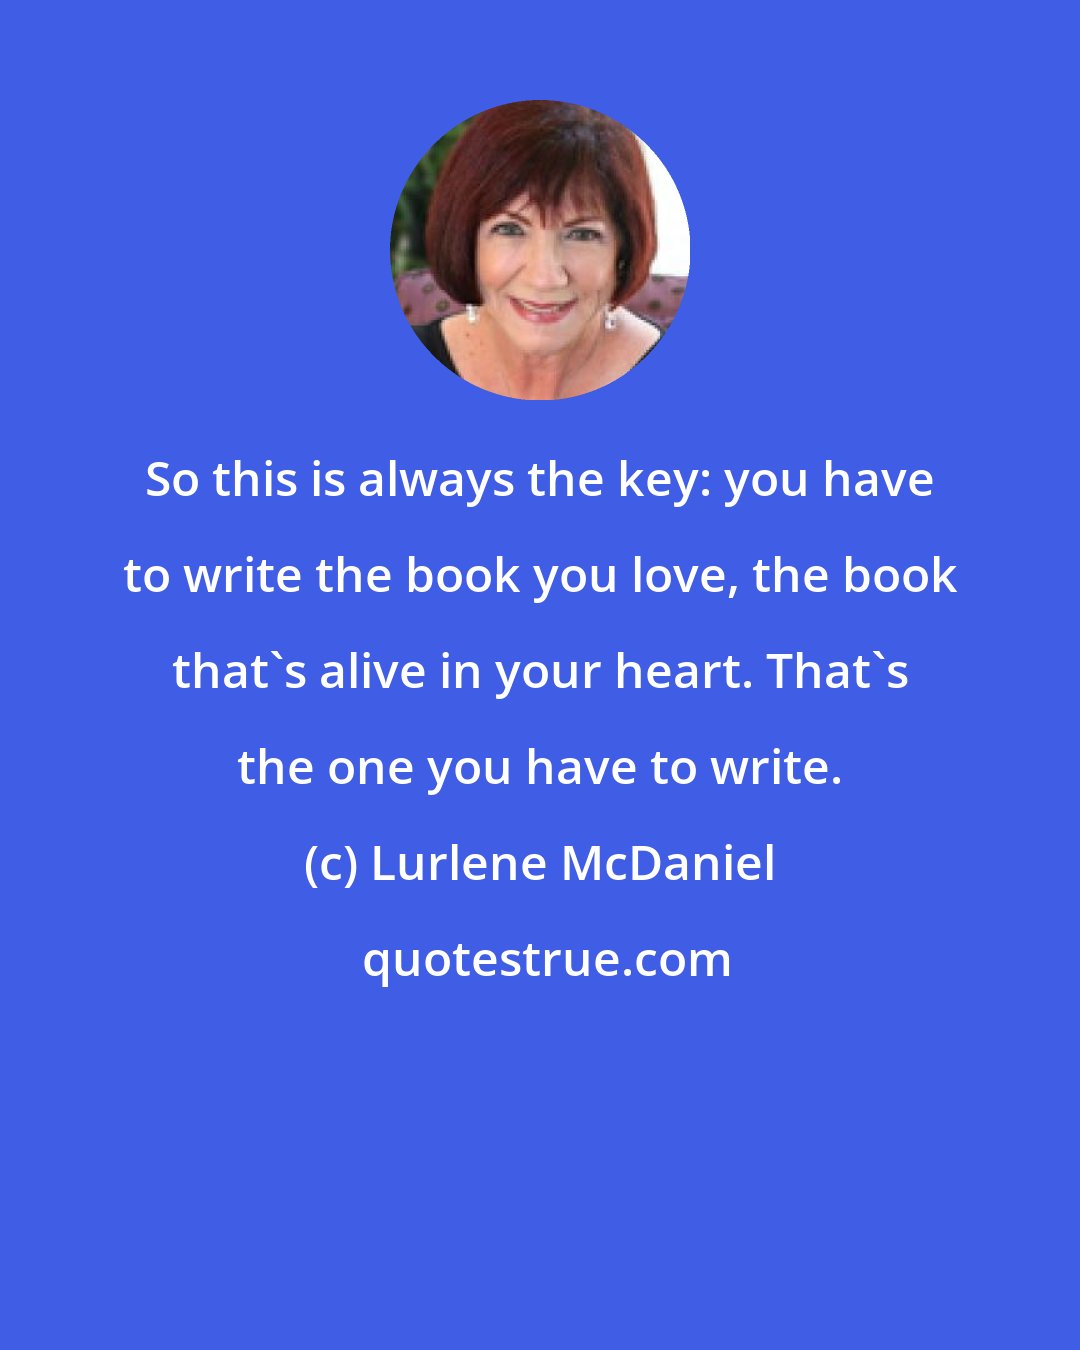 Lurlene McDaniel: So this is always the key: you have to write the book you love, the book that's alive in your heart. That's the one you have to write.